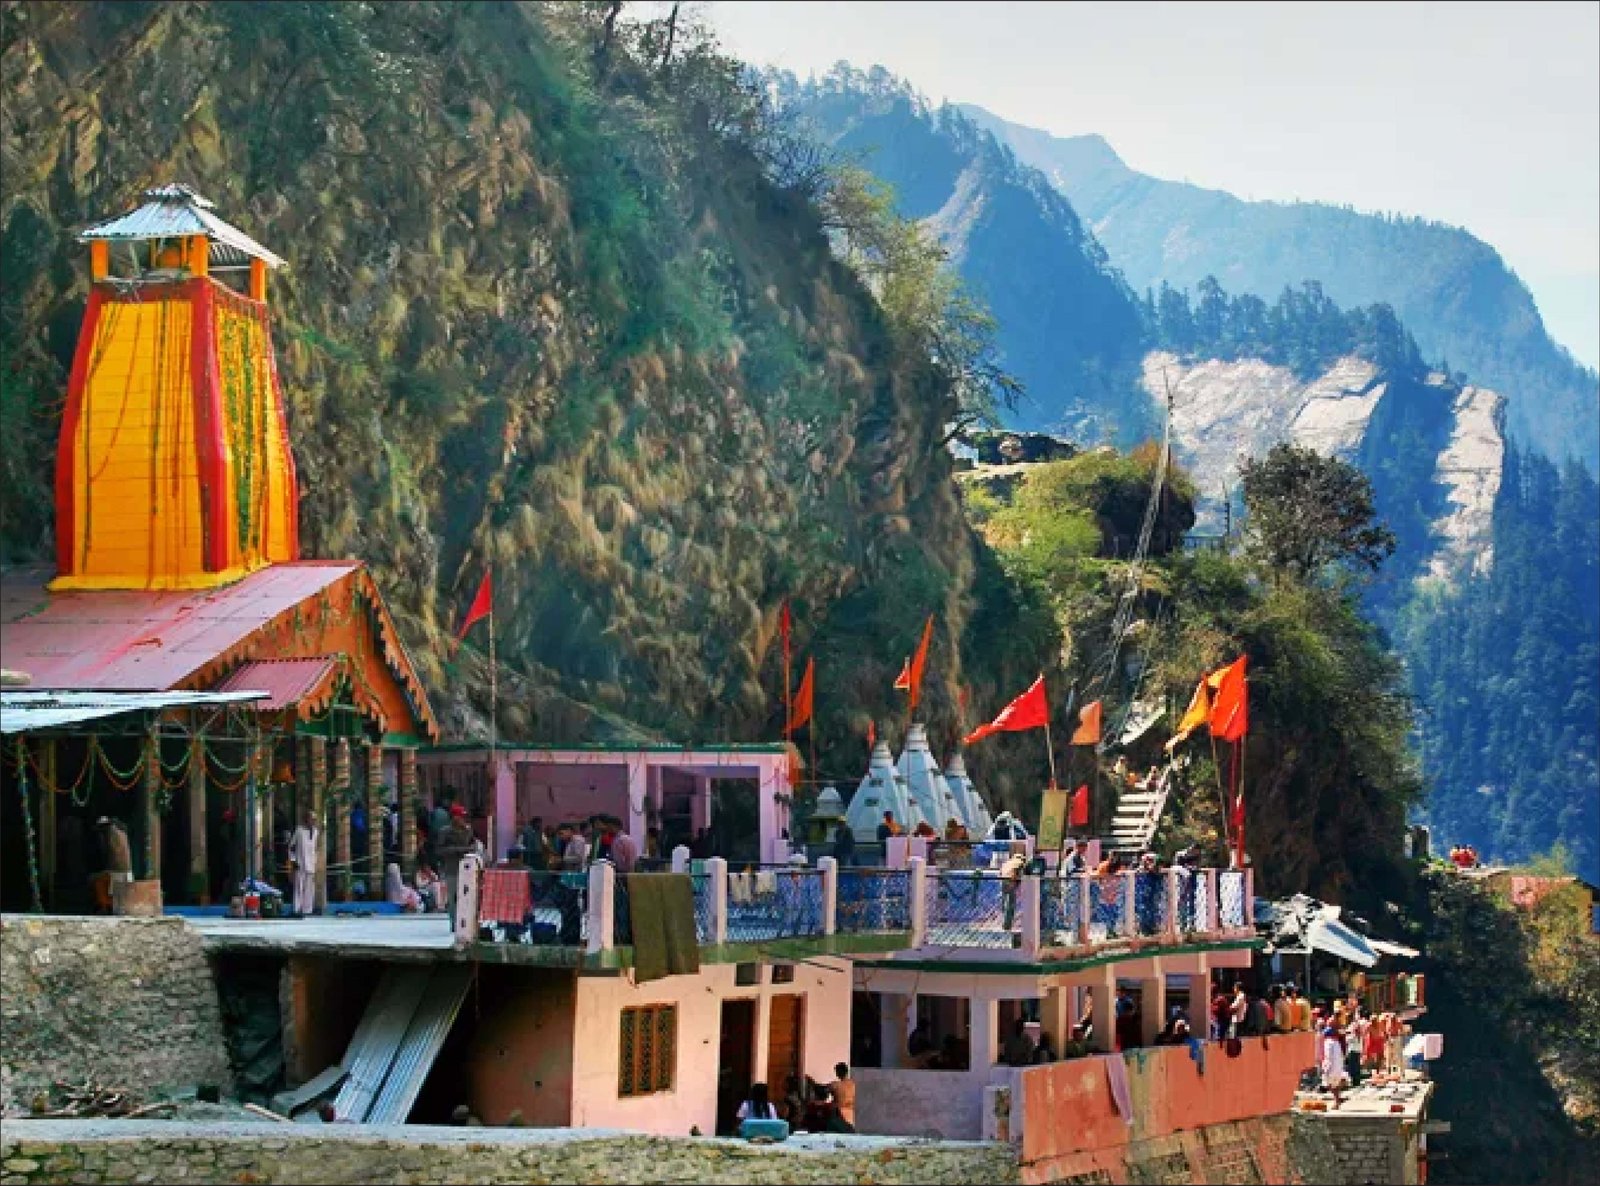 Chardham Yatra Trail - Scenic routes through nature's beauty